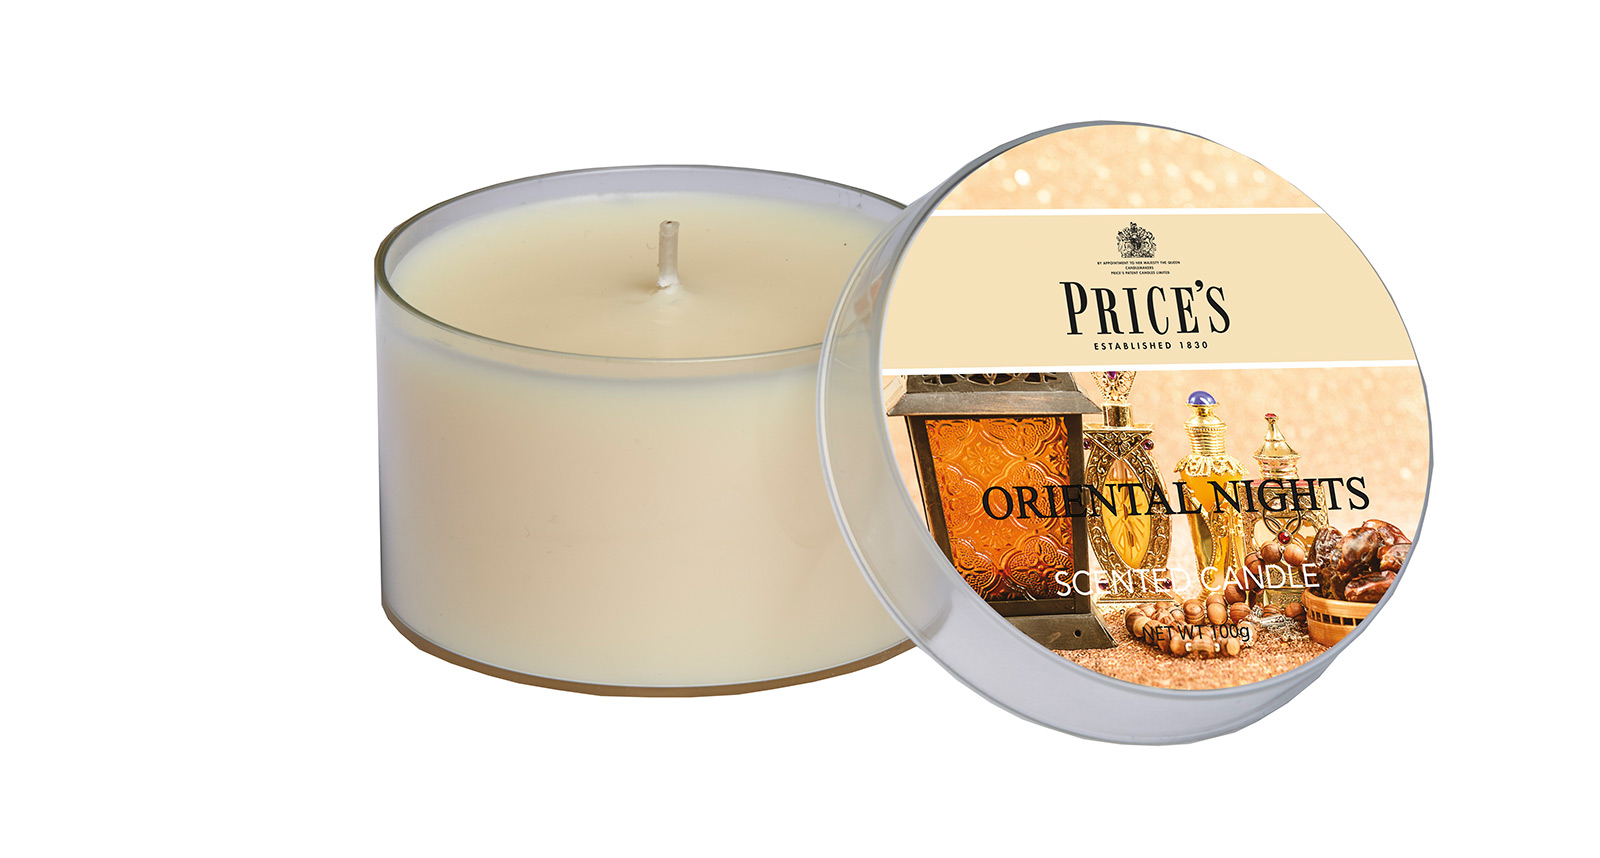 Prices Candle "Oriental Nights" 100g     